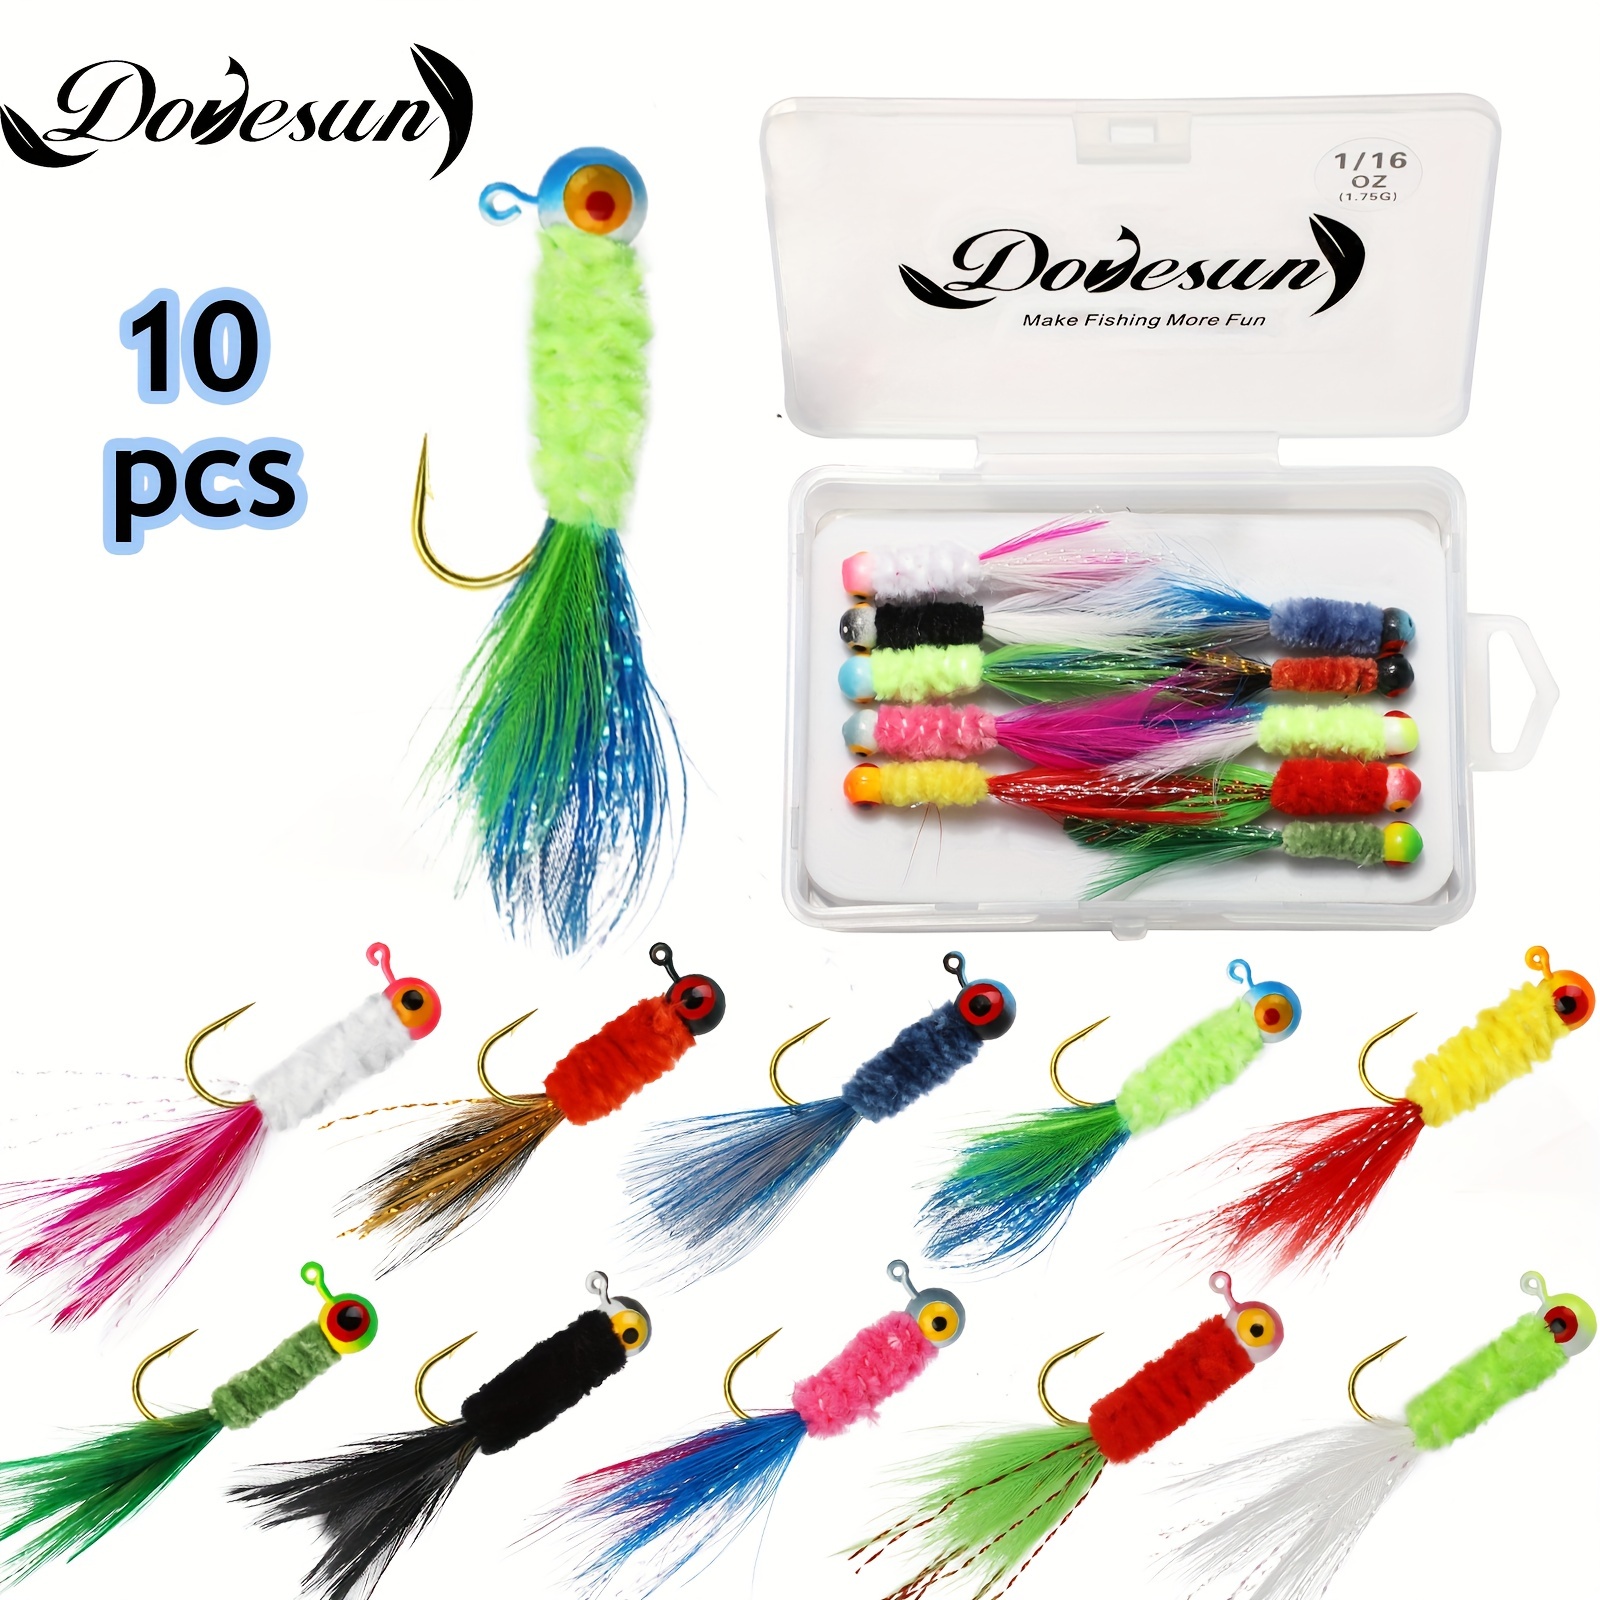 Dovesun 10pcs 0.8/1.75g (0.03/0.06oz ) Crappie Jigs, Jig Heads Fishing Bait  With Feather For Ice Or Fly Fishing, Fishing Hair Jigs For Panfish Sunfish